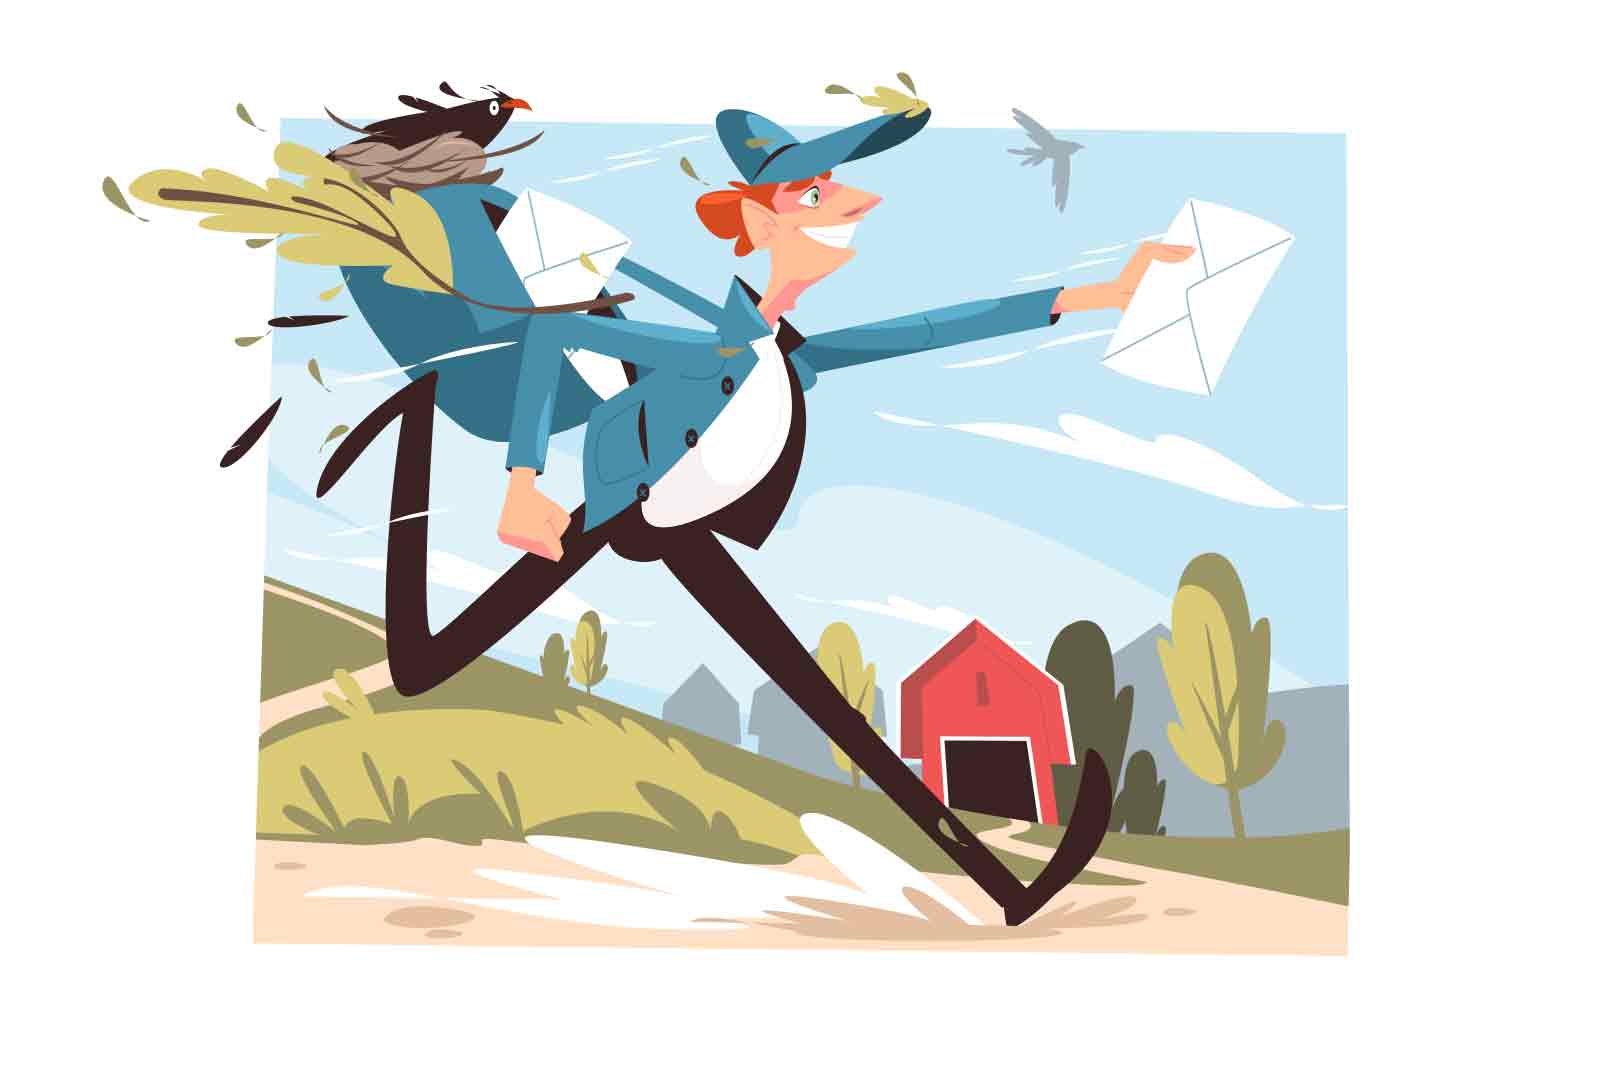 Postman hurrying to deliver letter, express mail delivery service vector illustration. Mailman in uniform and cap carrying messenger bag and envelope